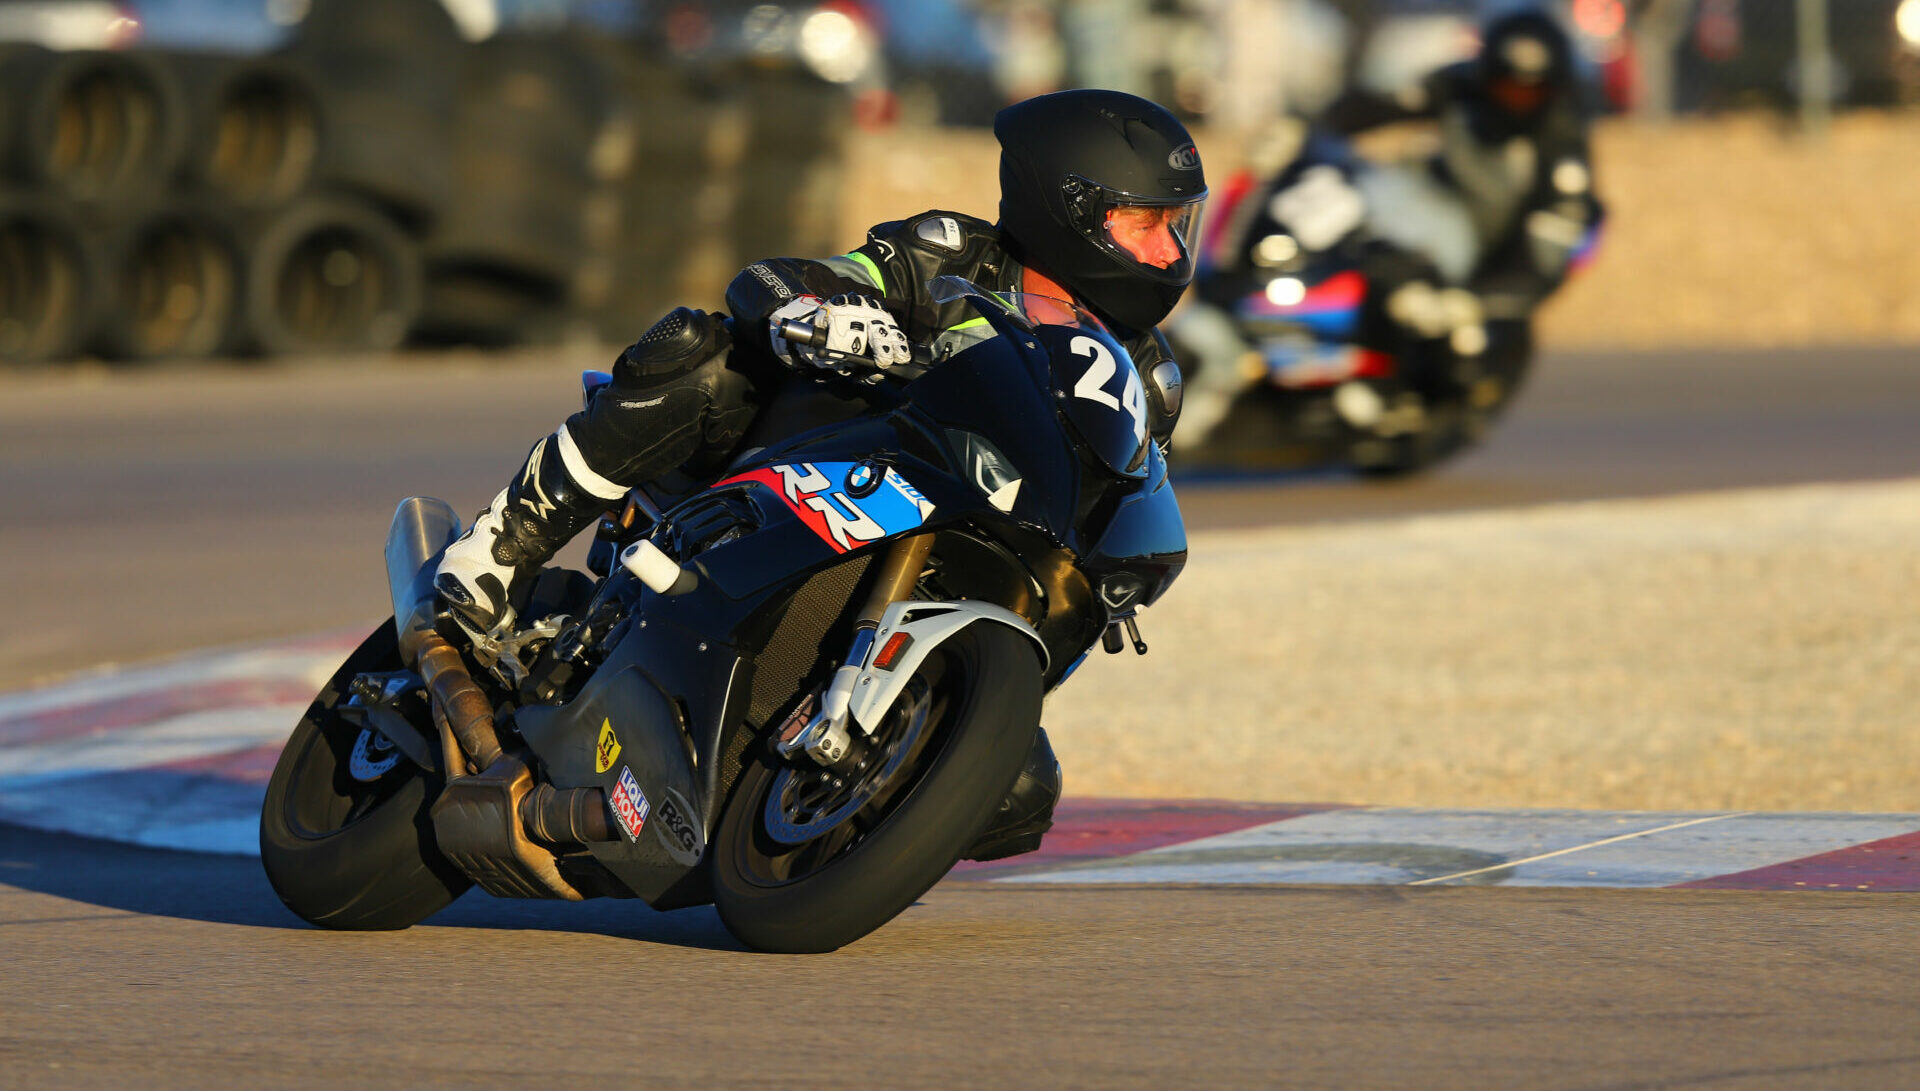 A California Superbike School student in action in Las Vegas. Photo by etechphoto.com, courtesy California Superbike School.